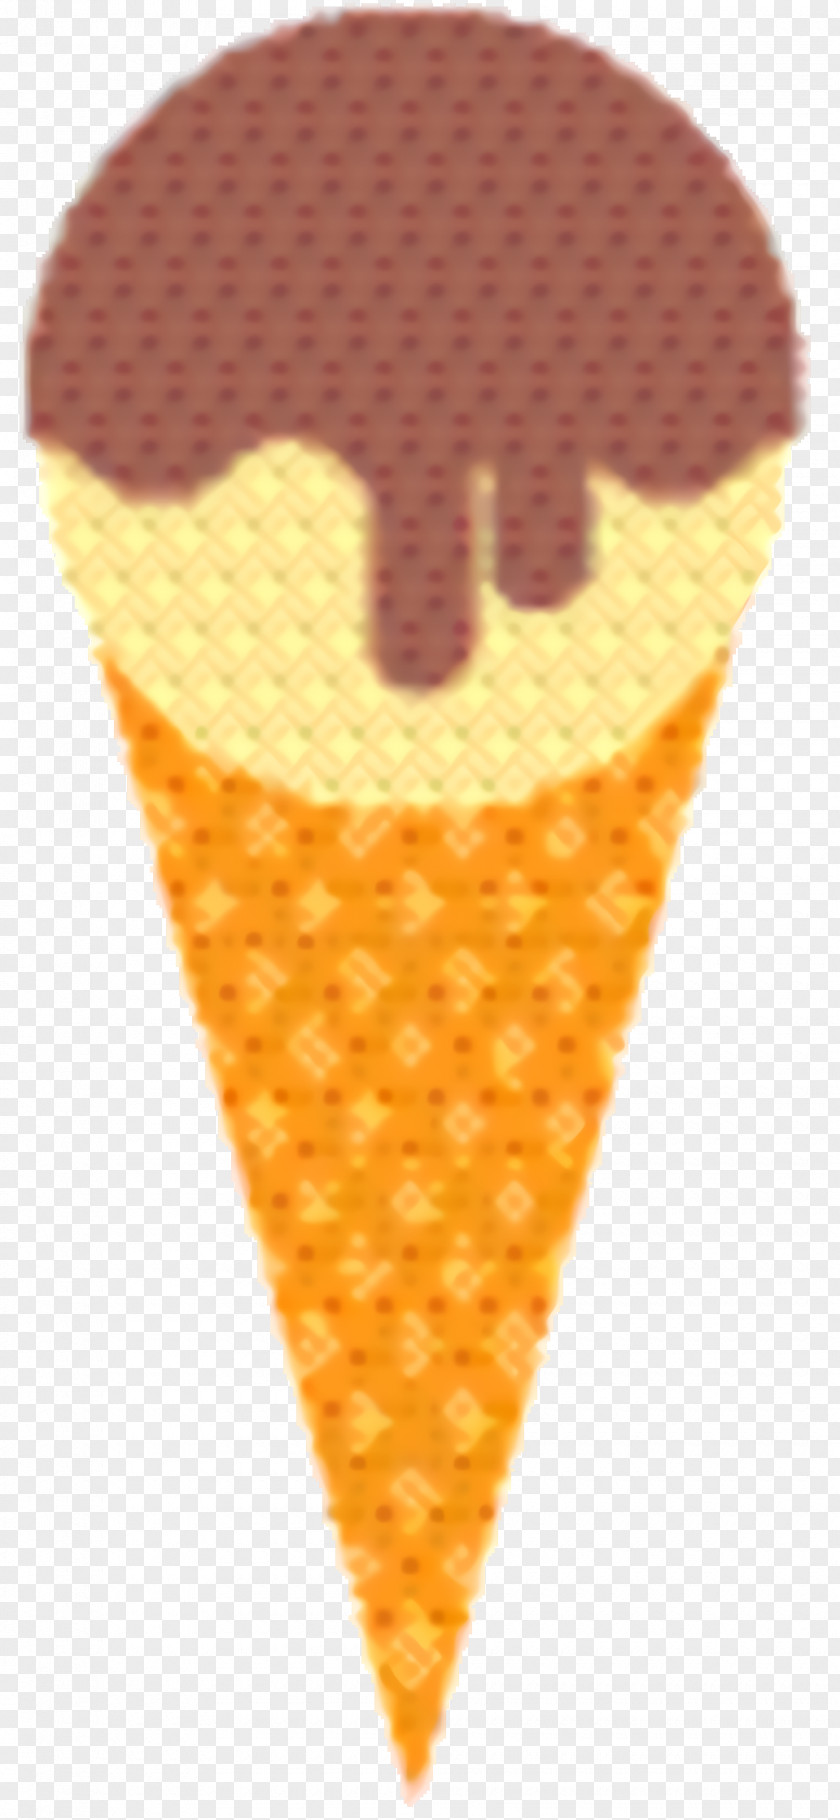 Chocolate Ice Cream Cone Background PNG